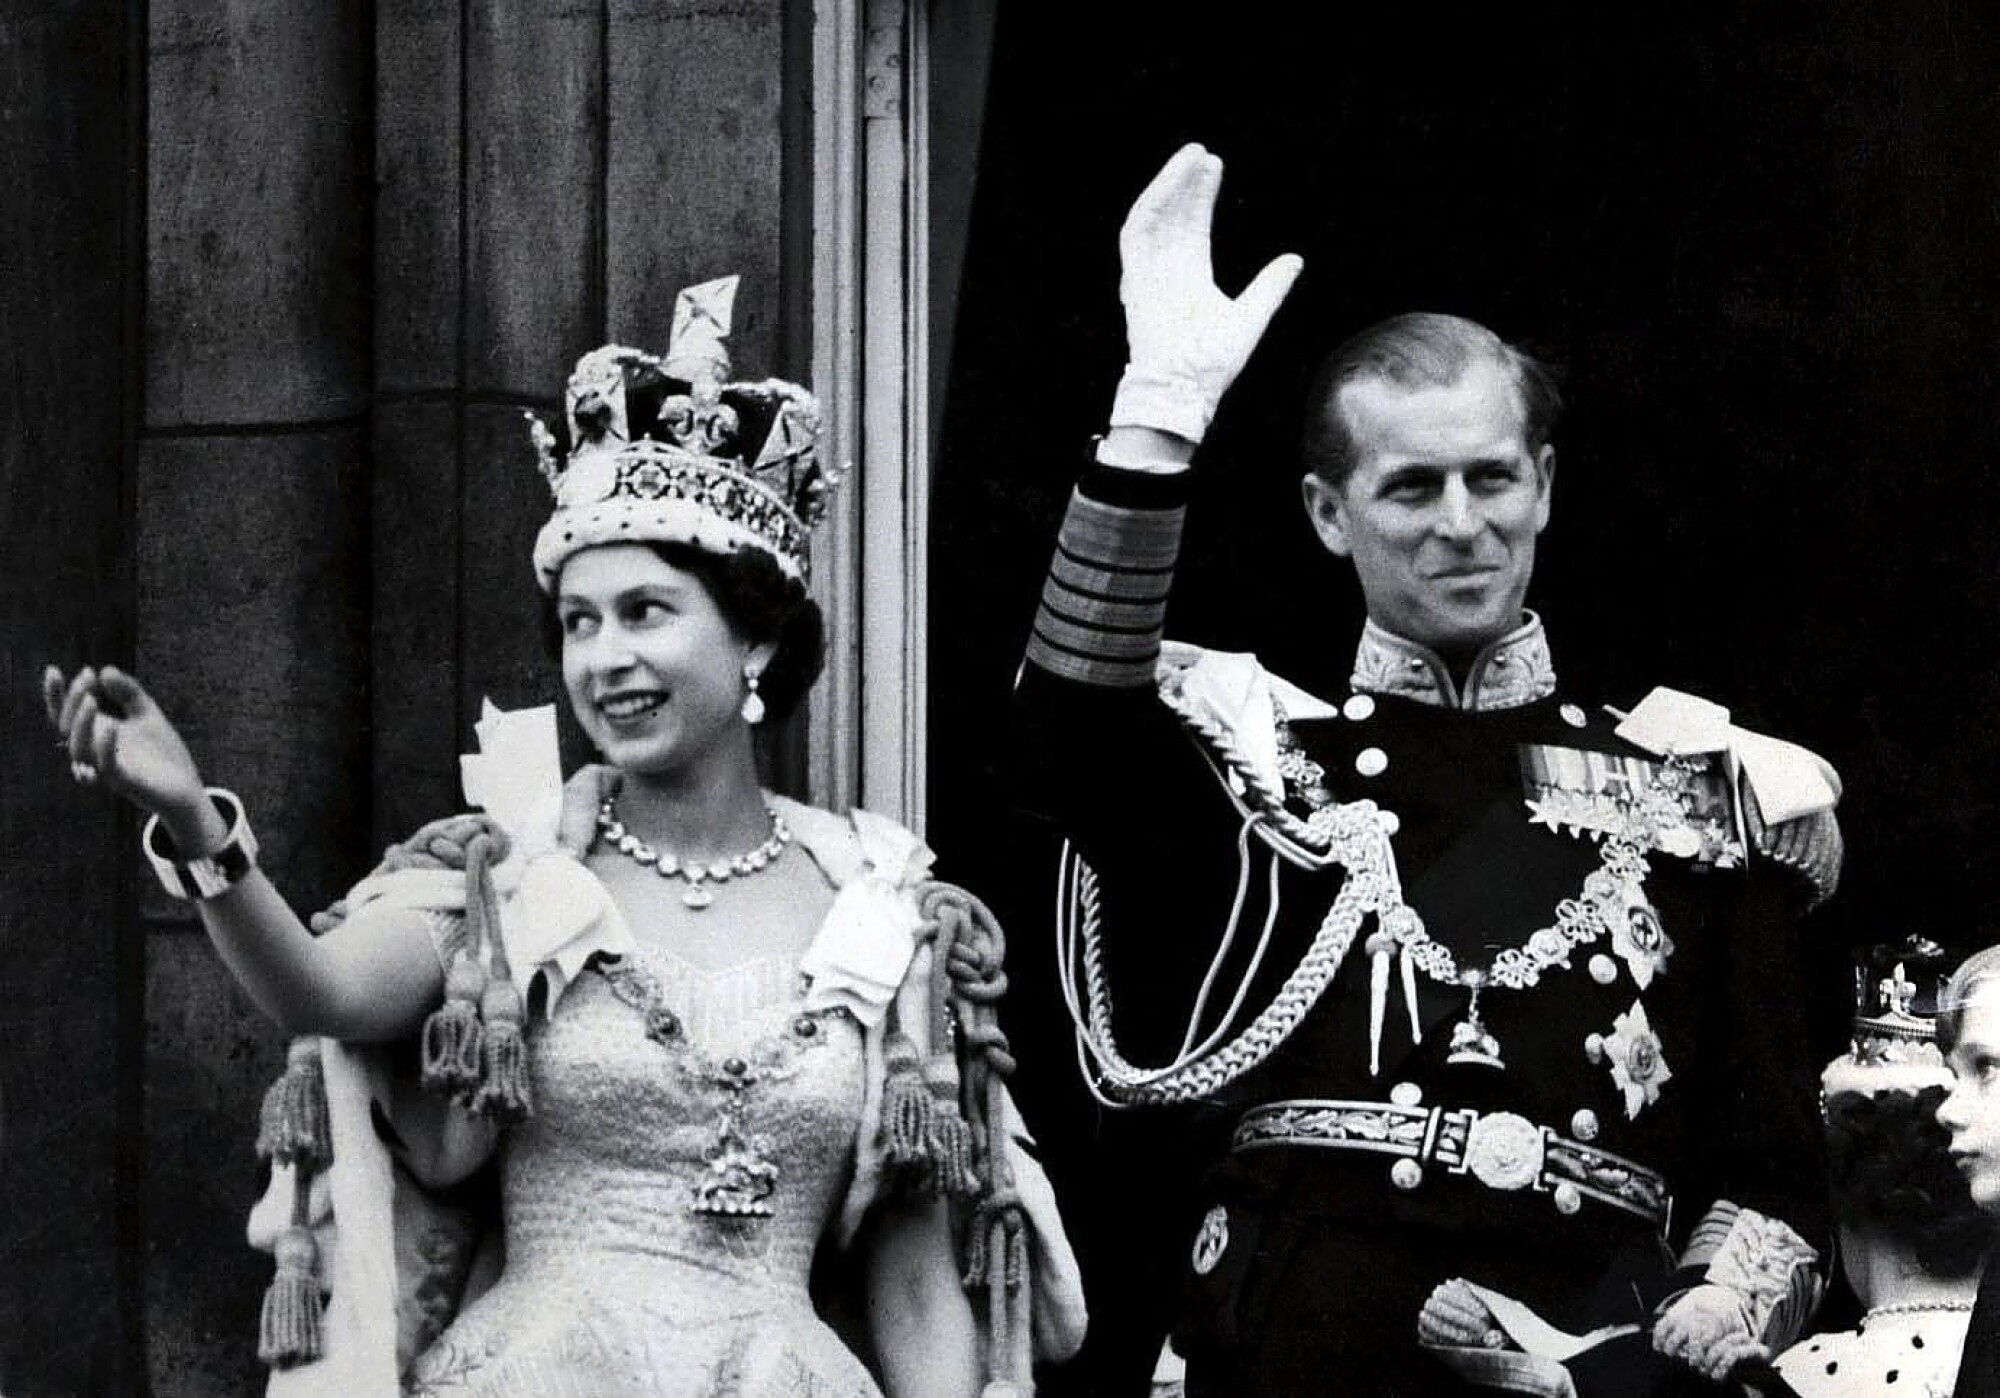 A woman wearing a crown and tasseled cloak, left, and a man in a military uniform with medals smile as they wave 